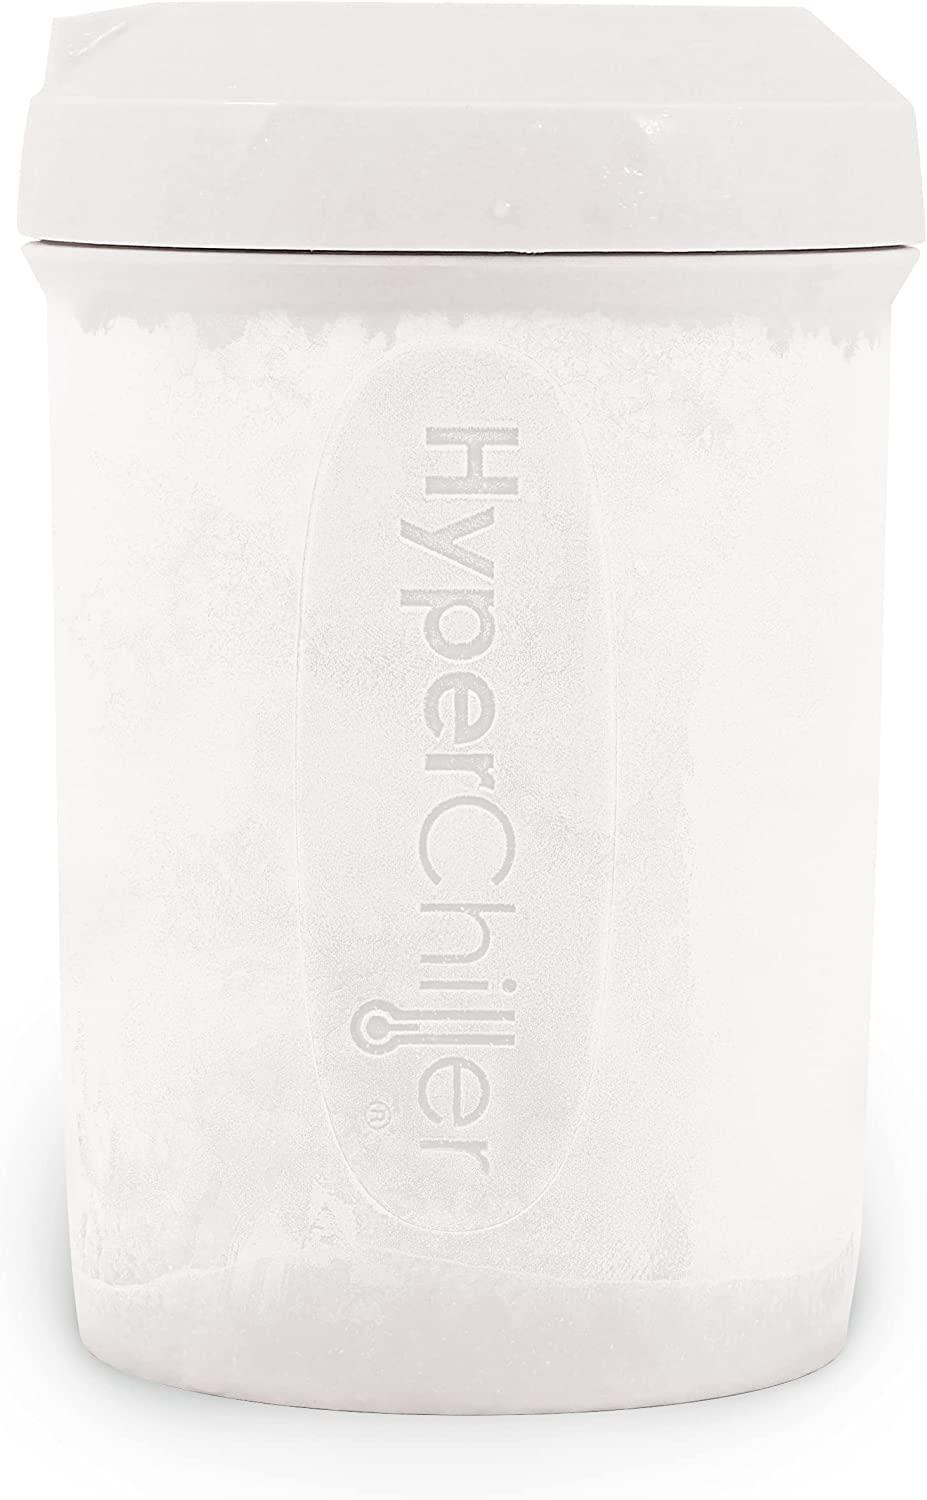 HyperChiller HC1 - Cooling cup - Size 4.25 in diameter x 6.73 in - Height  6.7 in - 12.5 fl.oz 